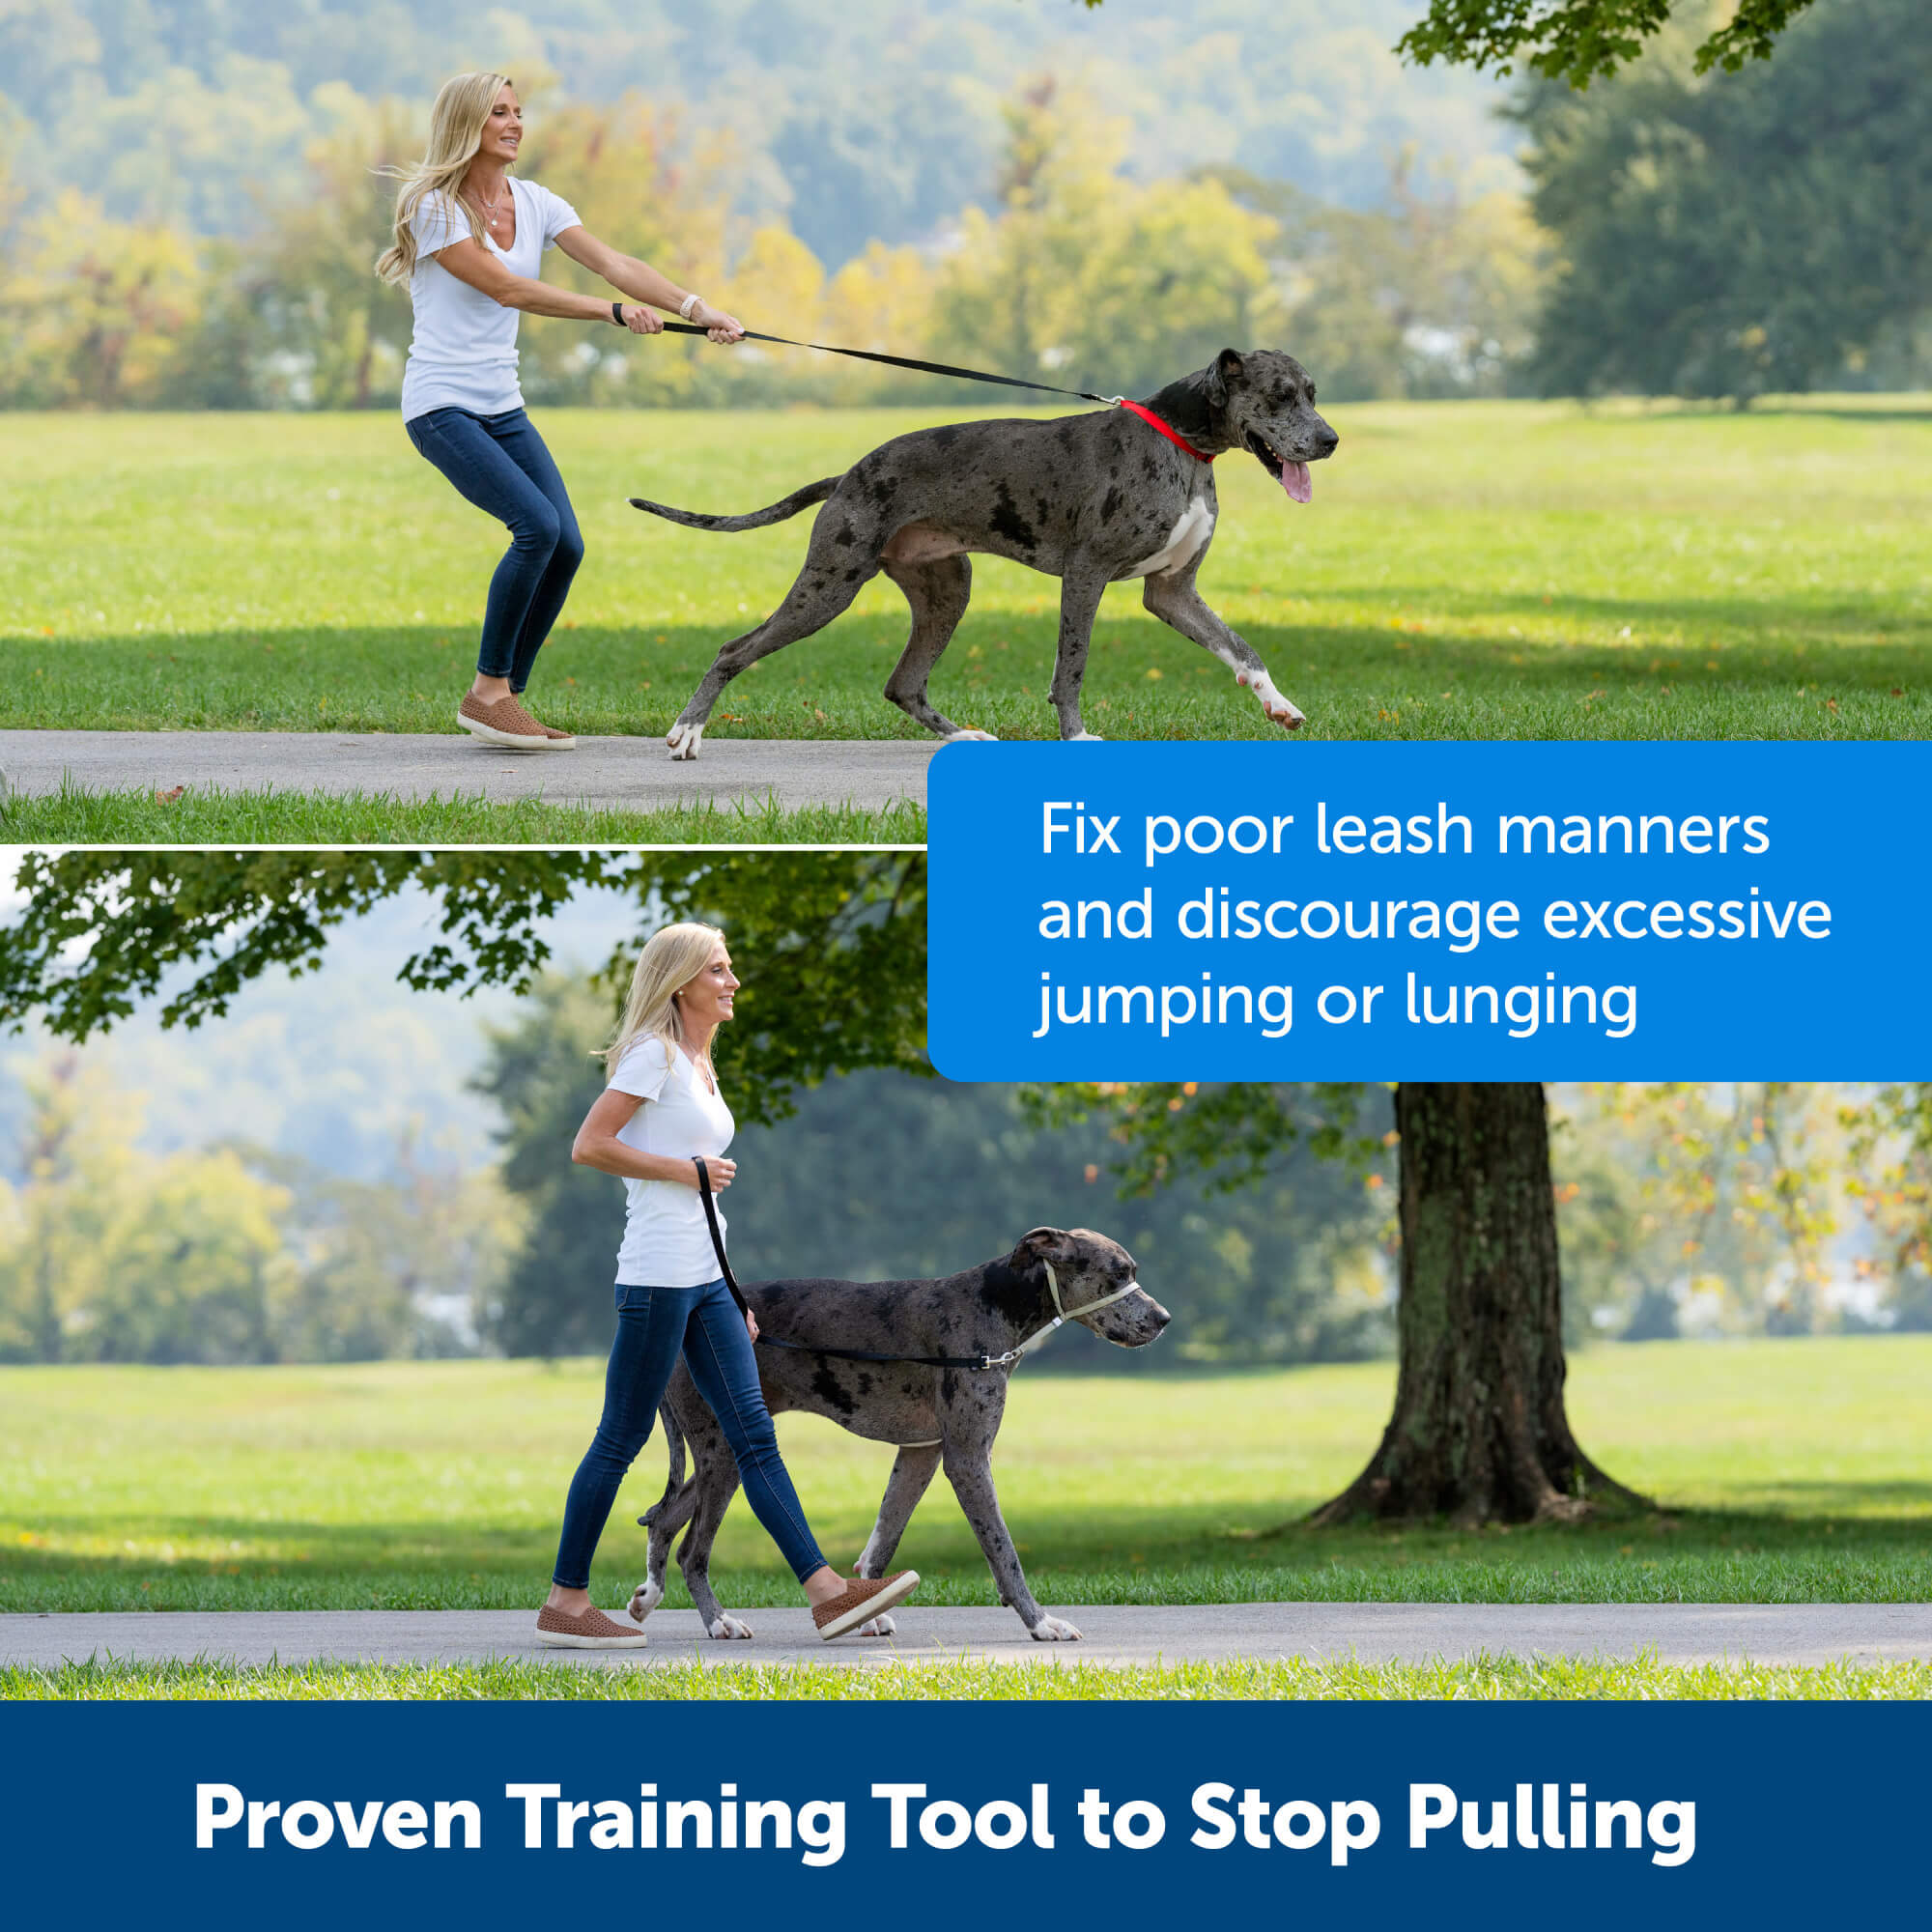 Proven training tool to stop pulling